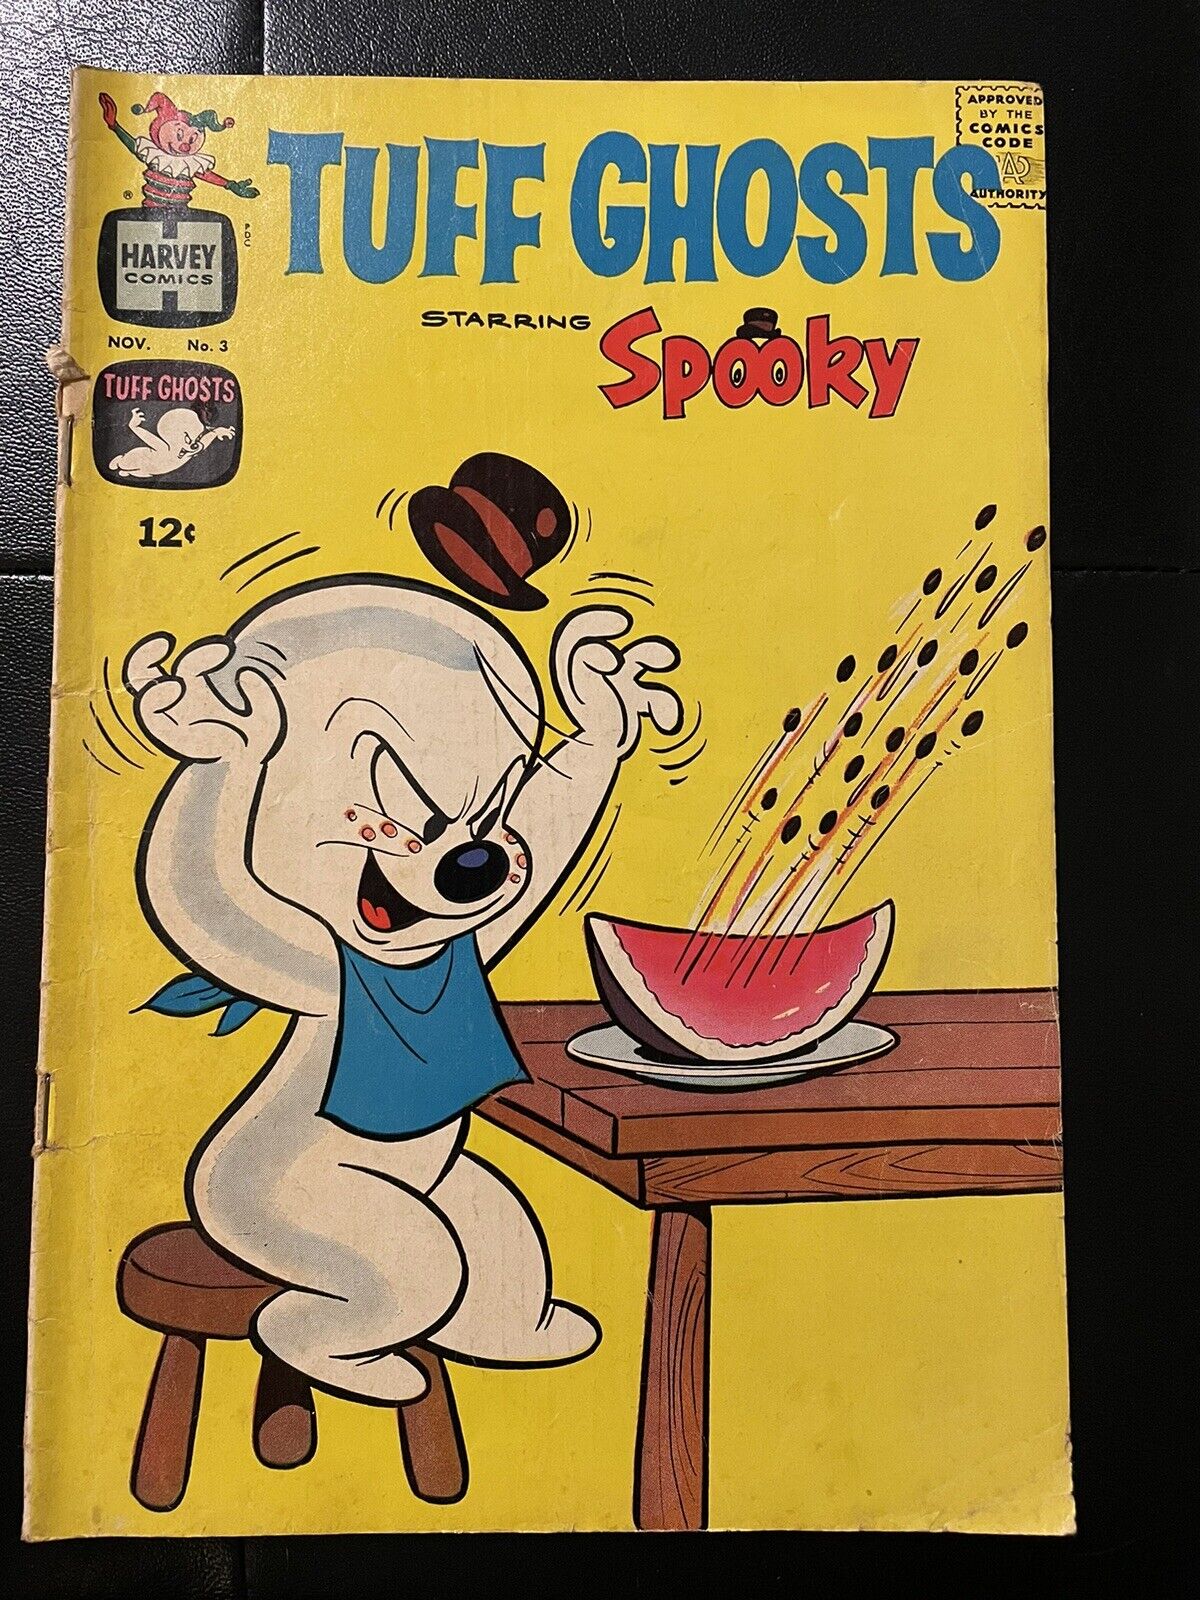 TUFF GHOSTS STARRING SPOOKY 1962 FILE COPY - GOOD